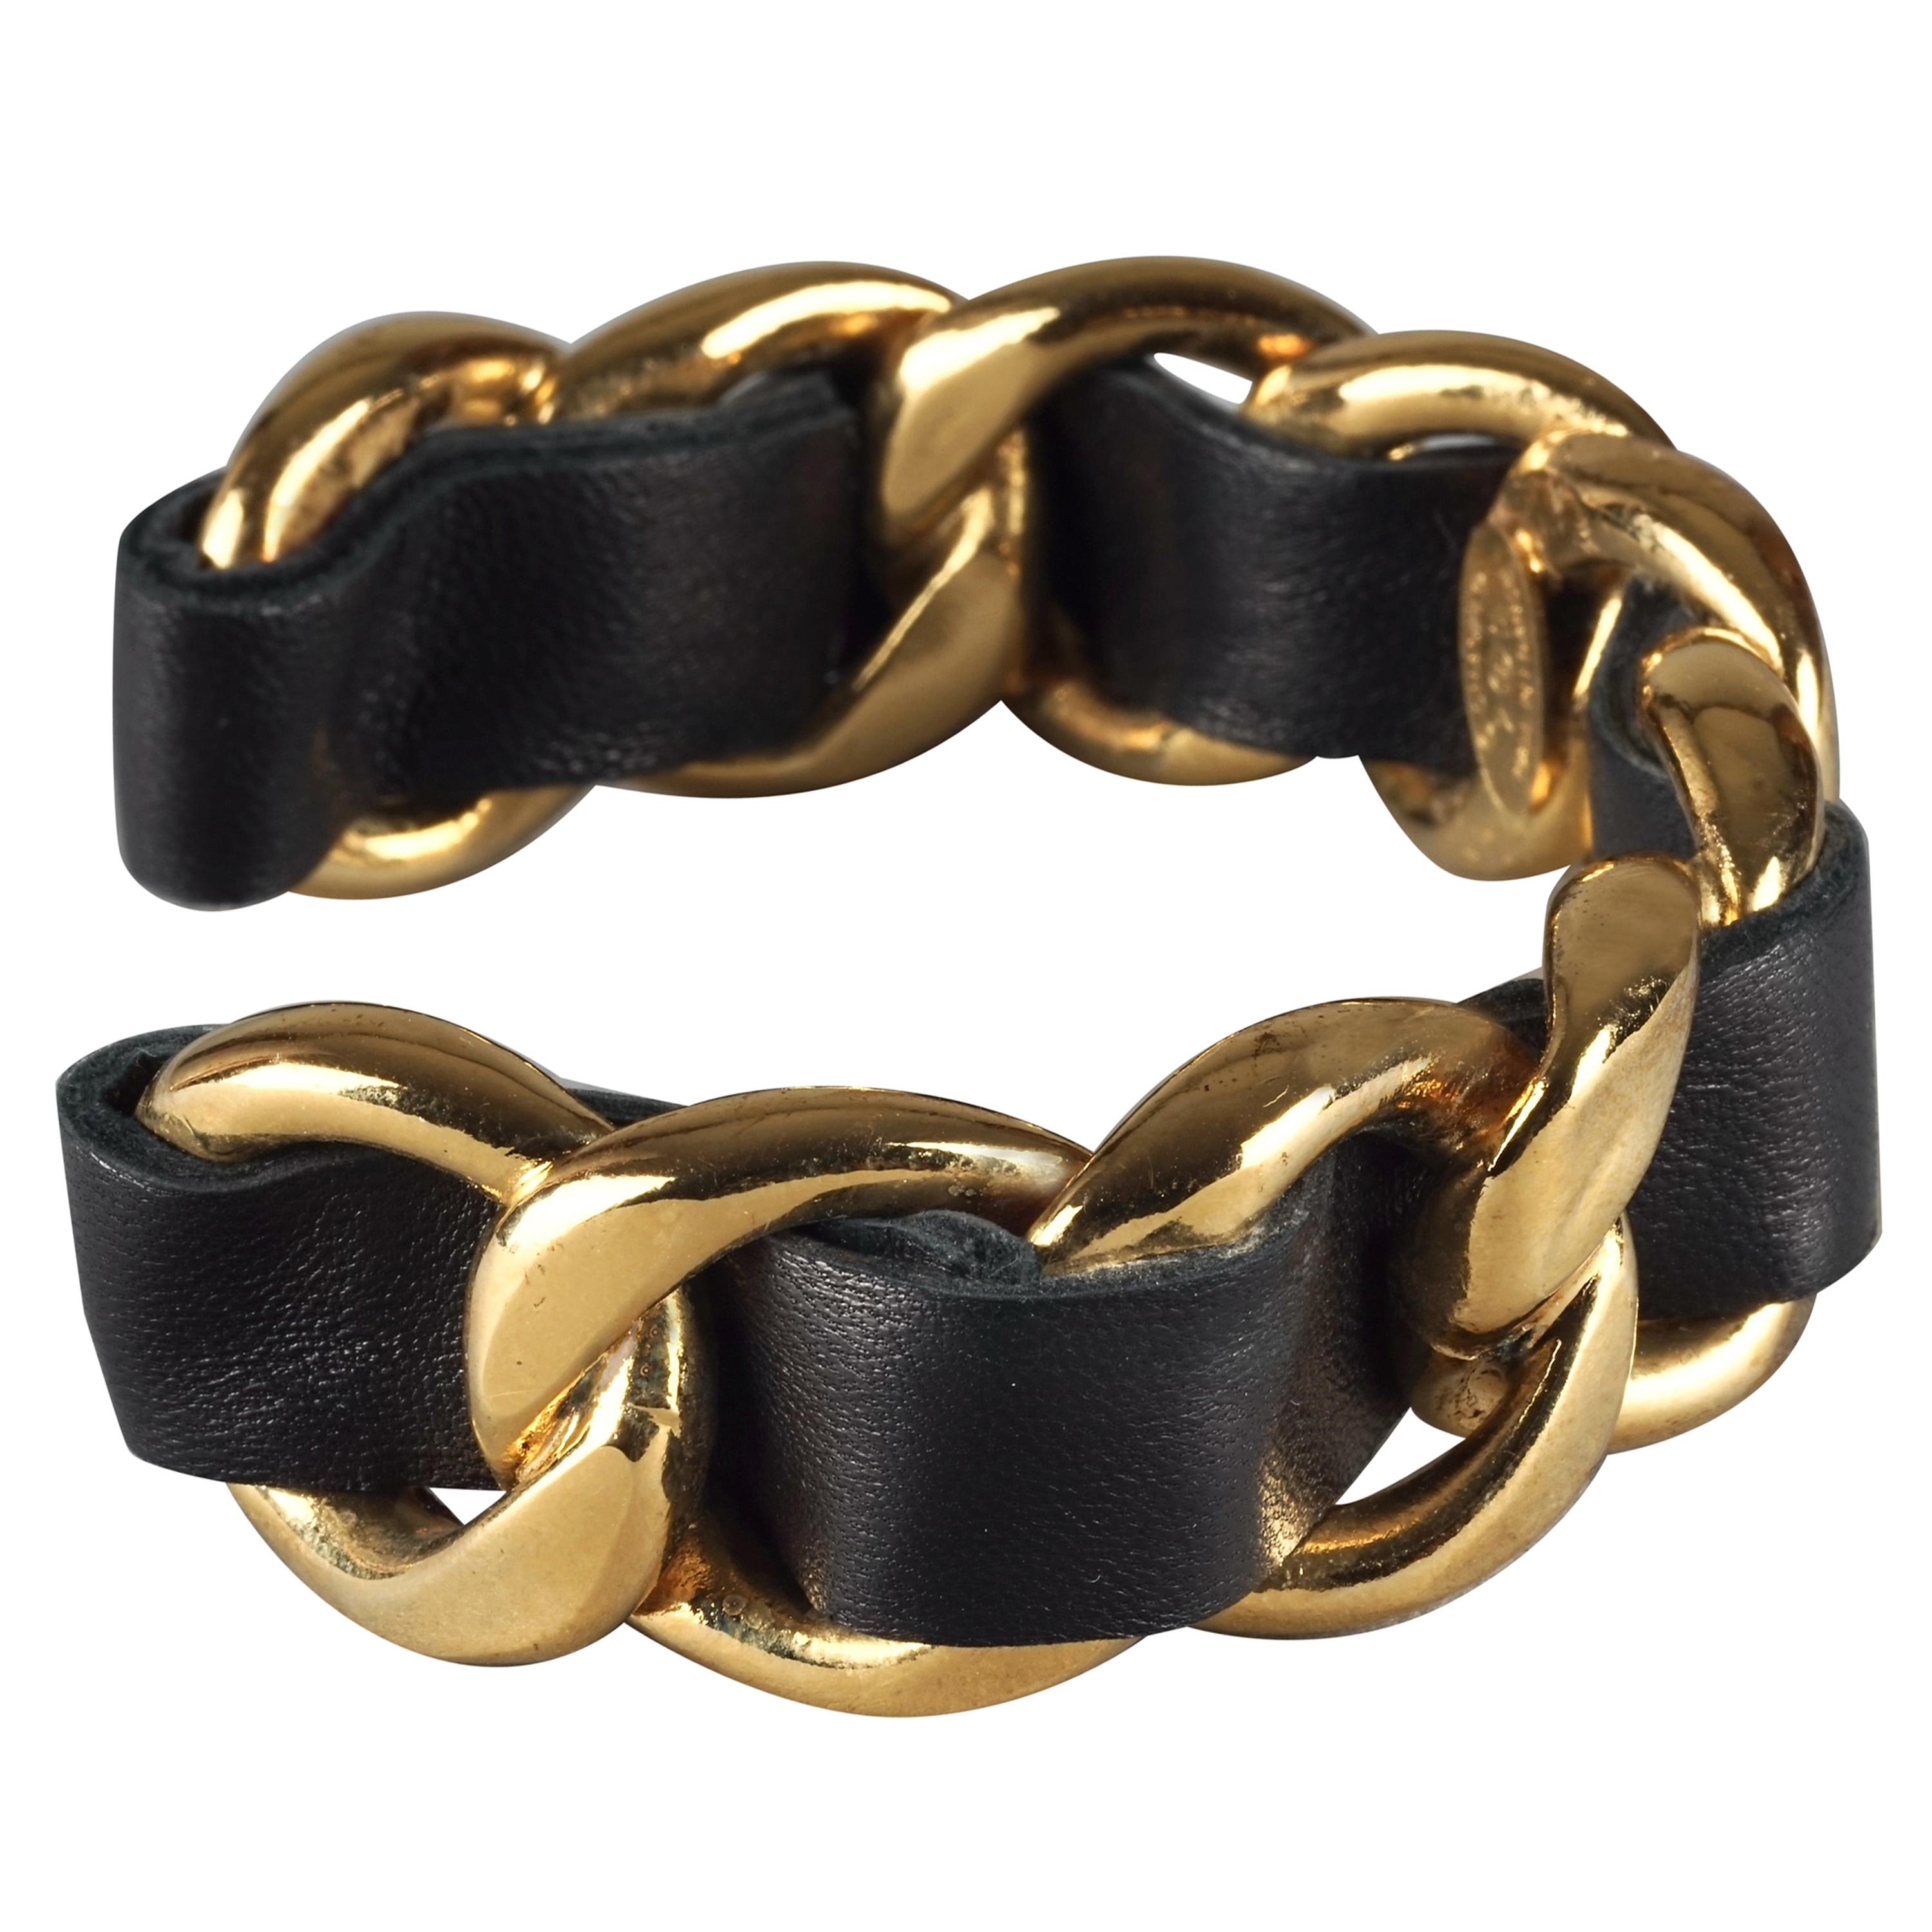 Vintage CHANEL Classic Gold Chain and Leather Cuff Bracelet